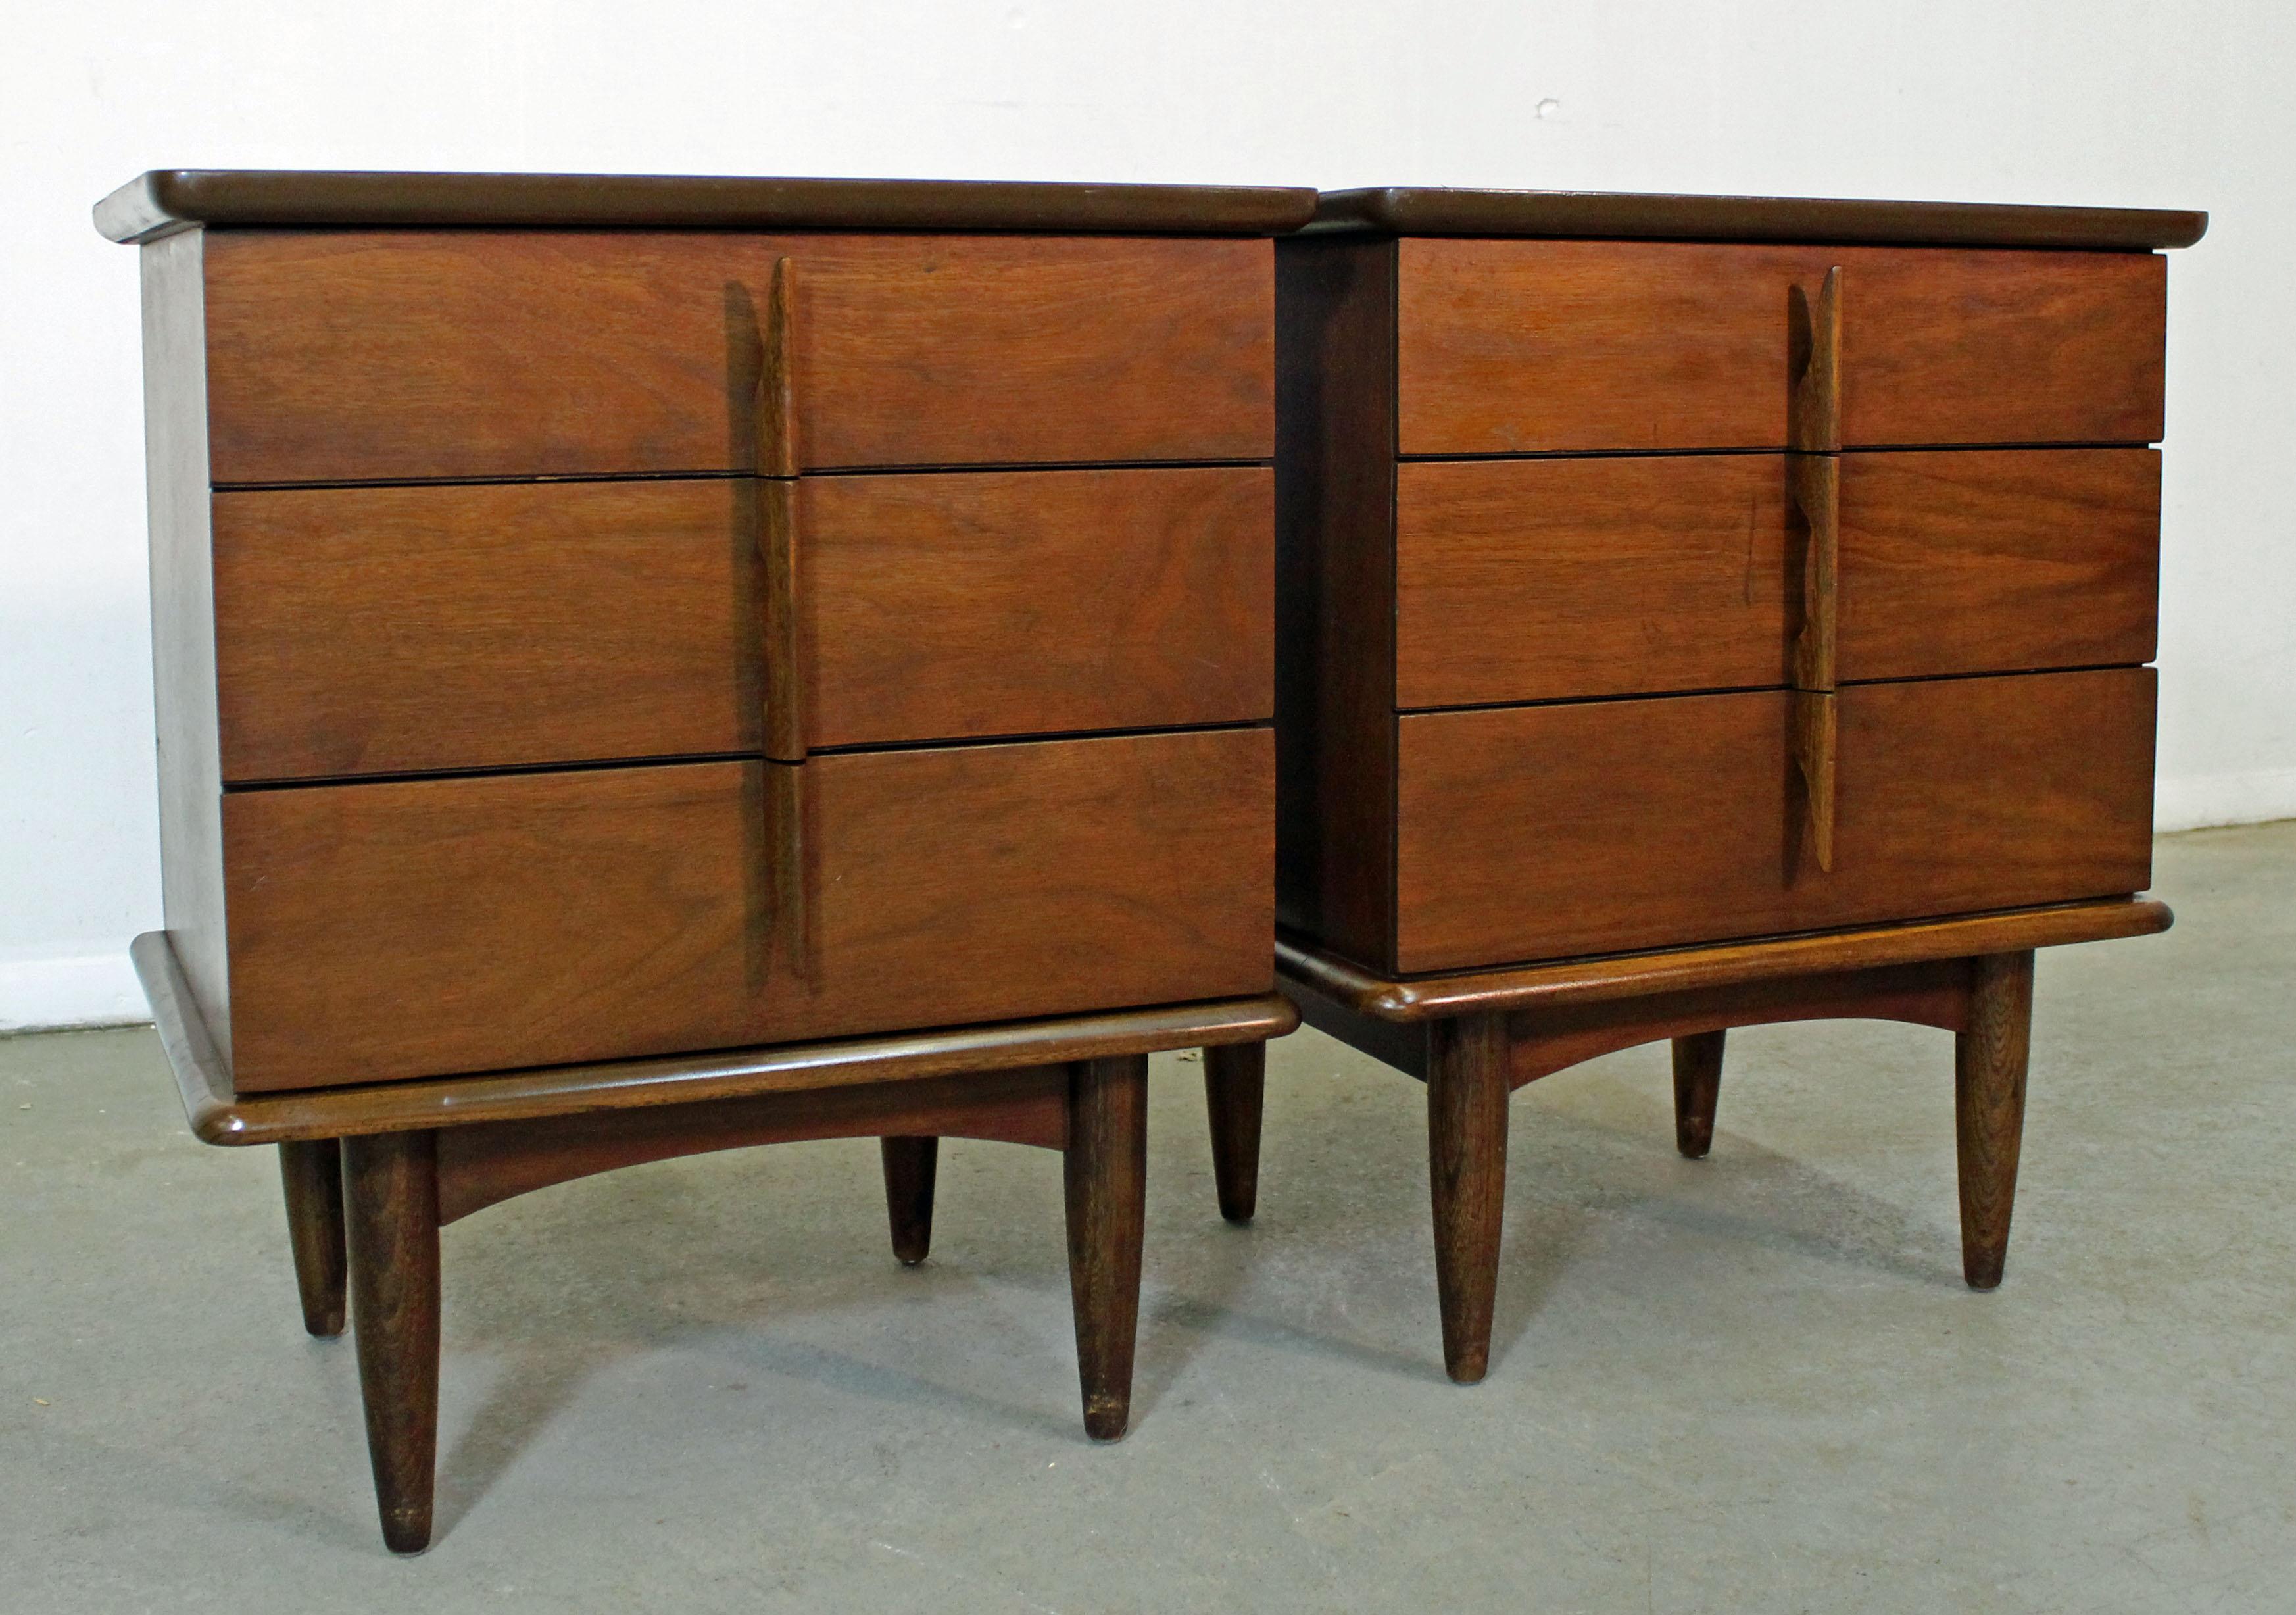 Offered is an excellent example of American Mid-Century Modern design. Includes a pair of walnut nightstands with three drawers and sculpted pulls. They are in good condition, tops have been refinished, but some show some age wear. They are not